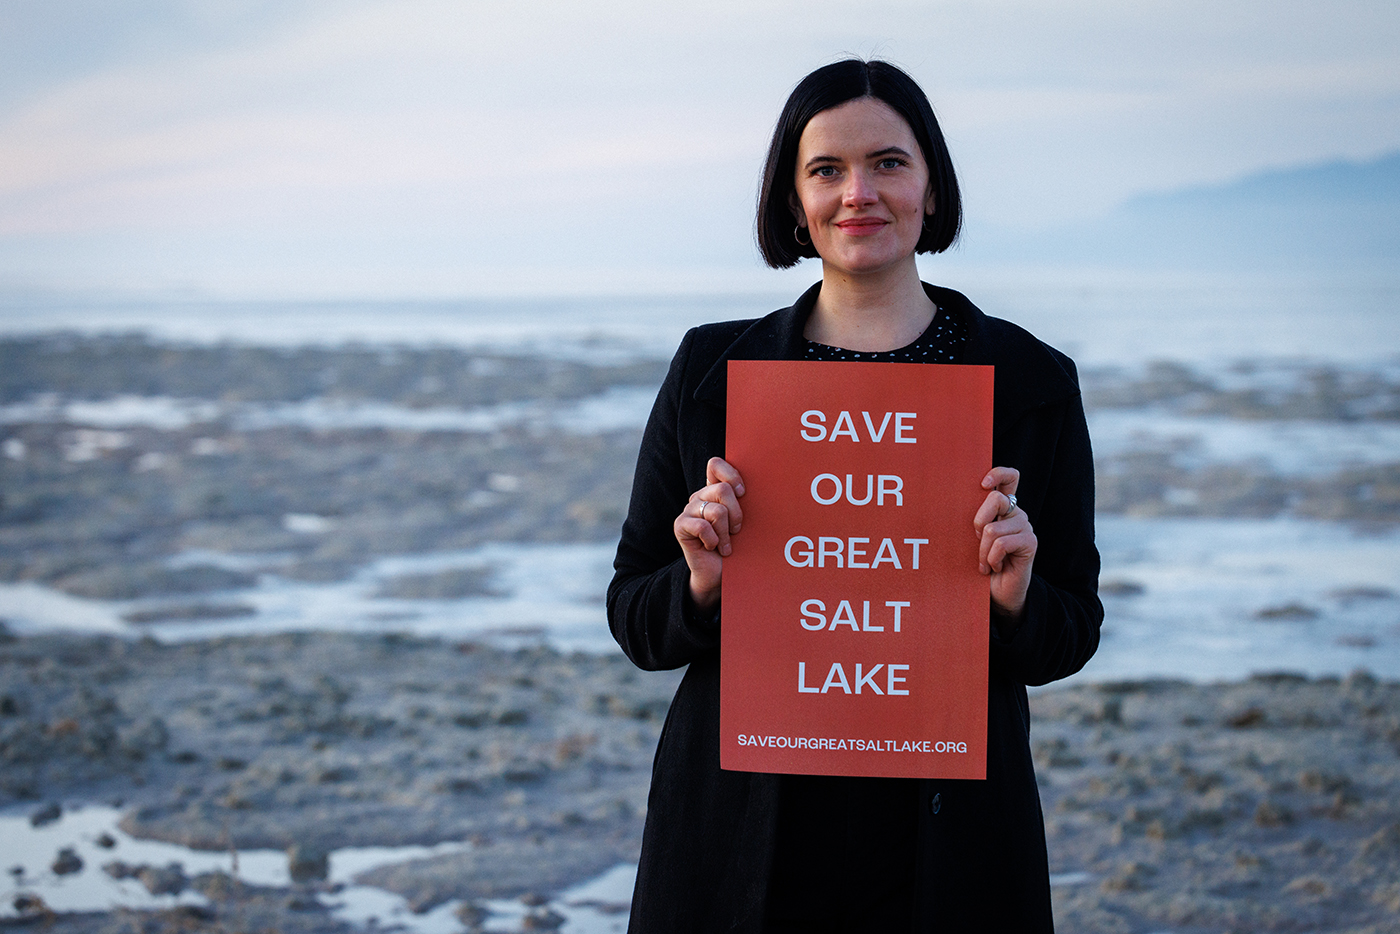 Denise Cartwright started Save Our Great Salt Lake as “a passion project … motivated by urgency” for the precarious future of the Great Salt Lake.